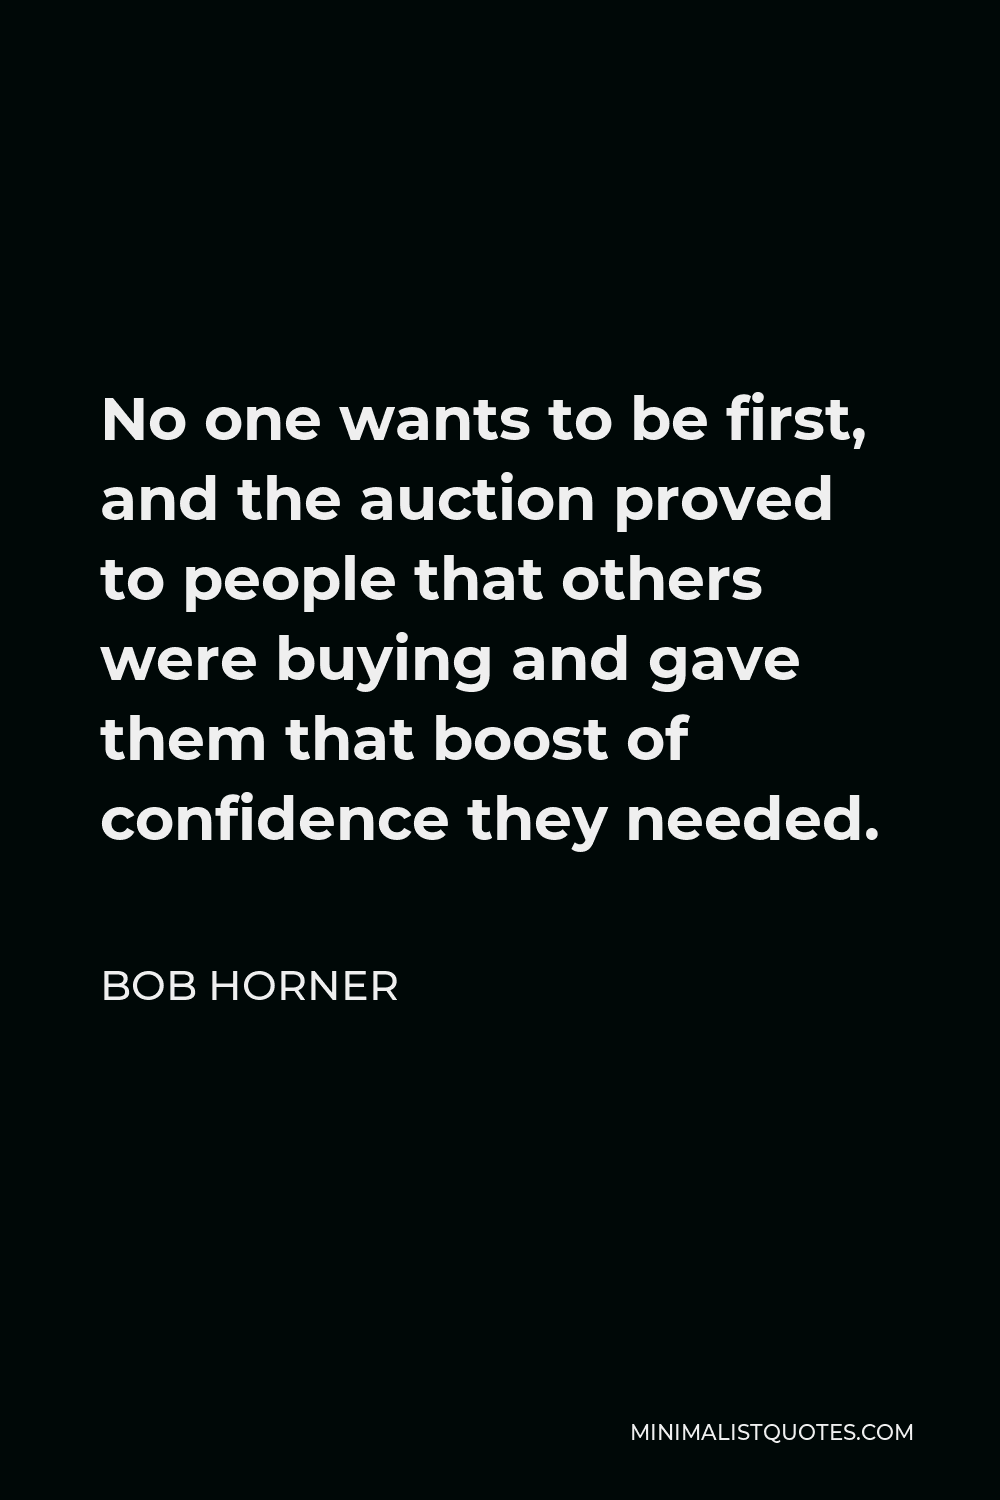 Bob Horner Quote - No one wants to be first, and the auction proved to people that others were buying and gave them that boost of confidence they needed.